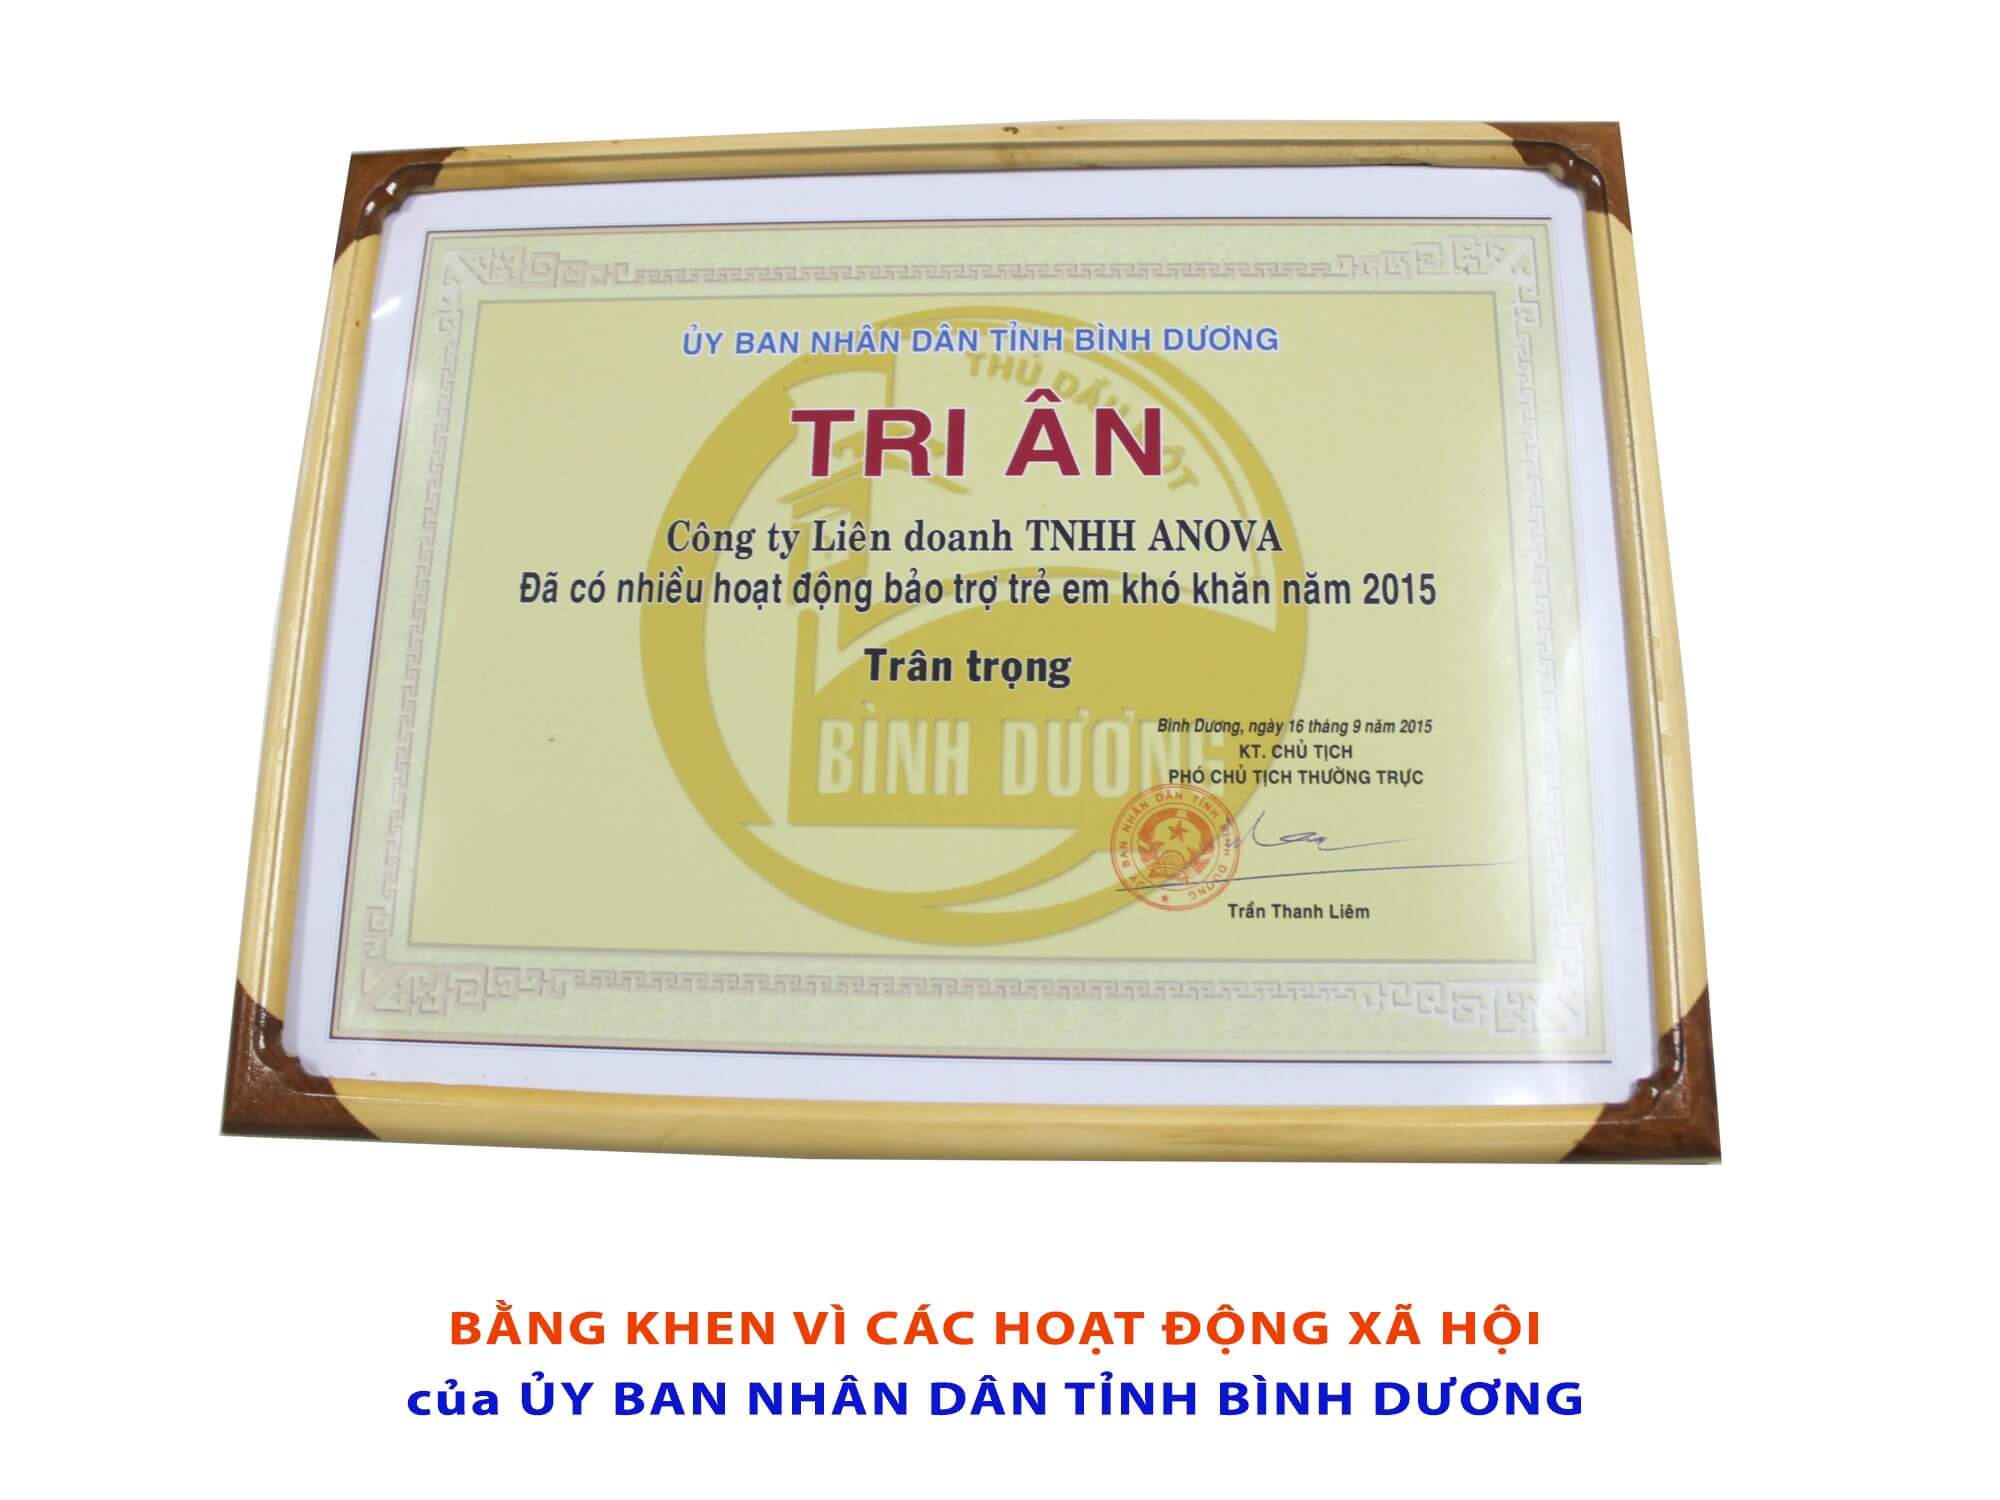 Certificate of Merit for Social Activities of People's Committee of Binh Duong Province